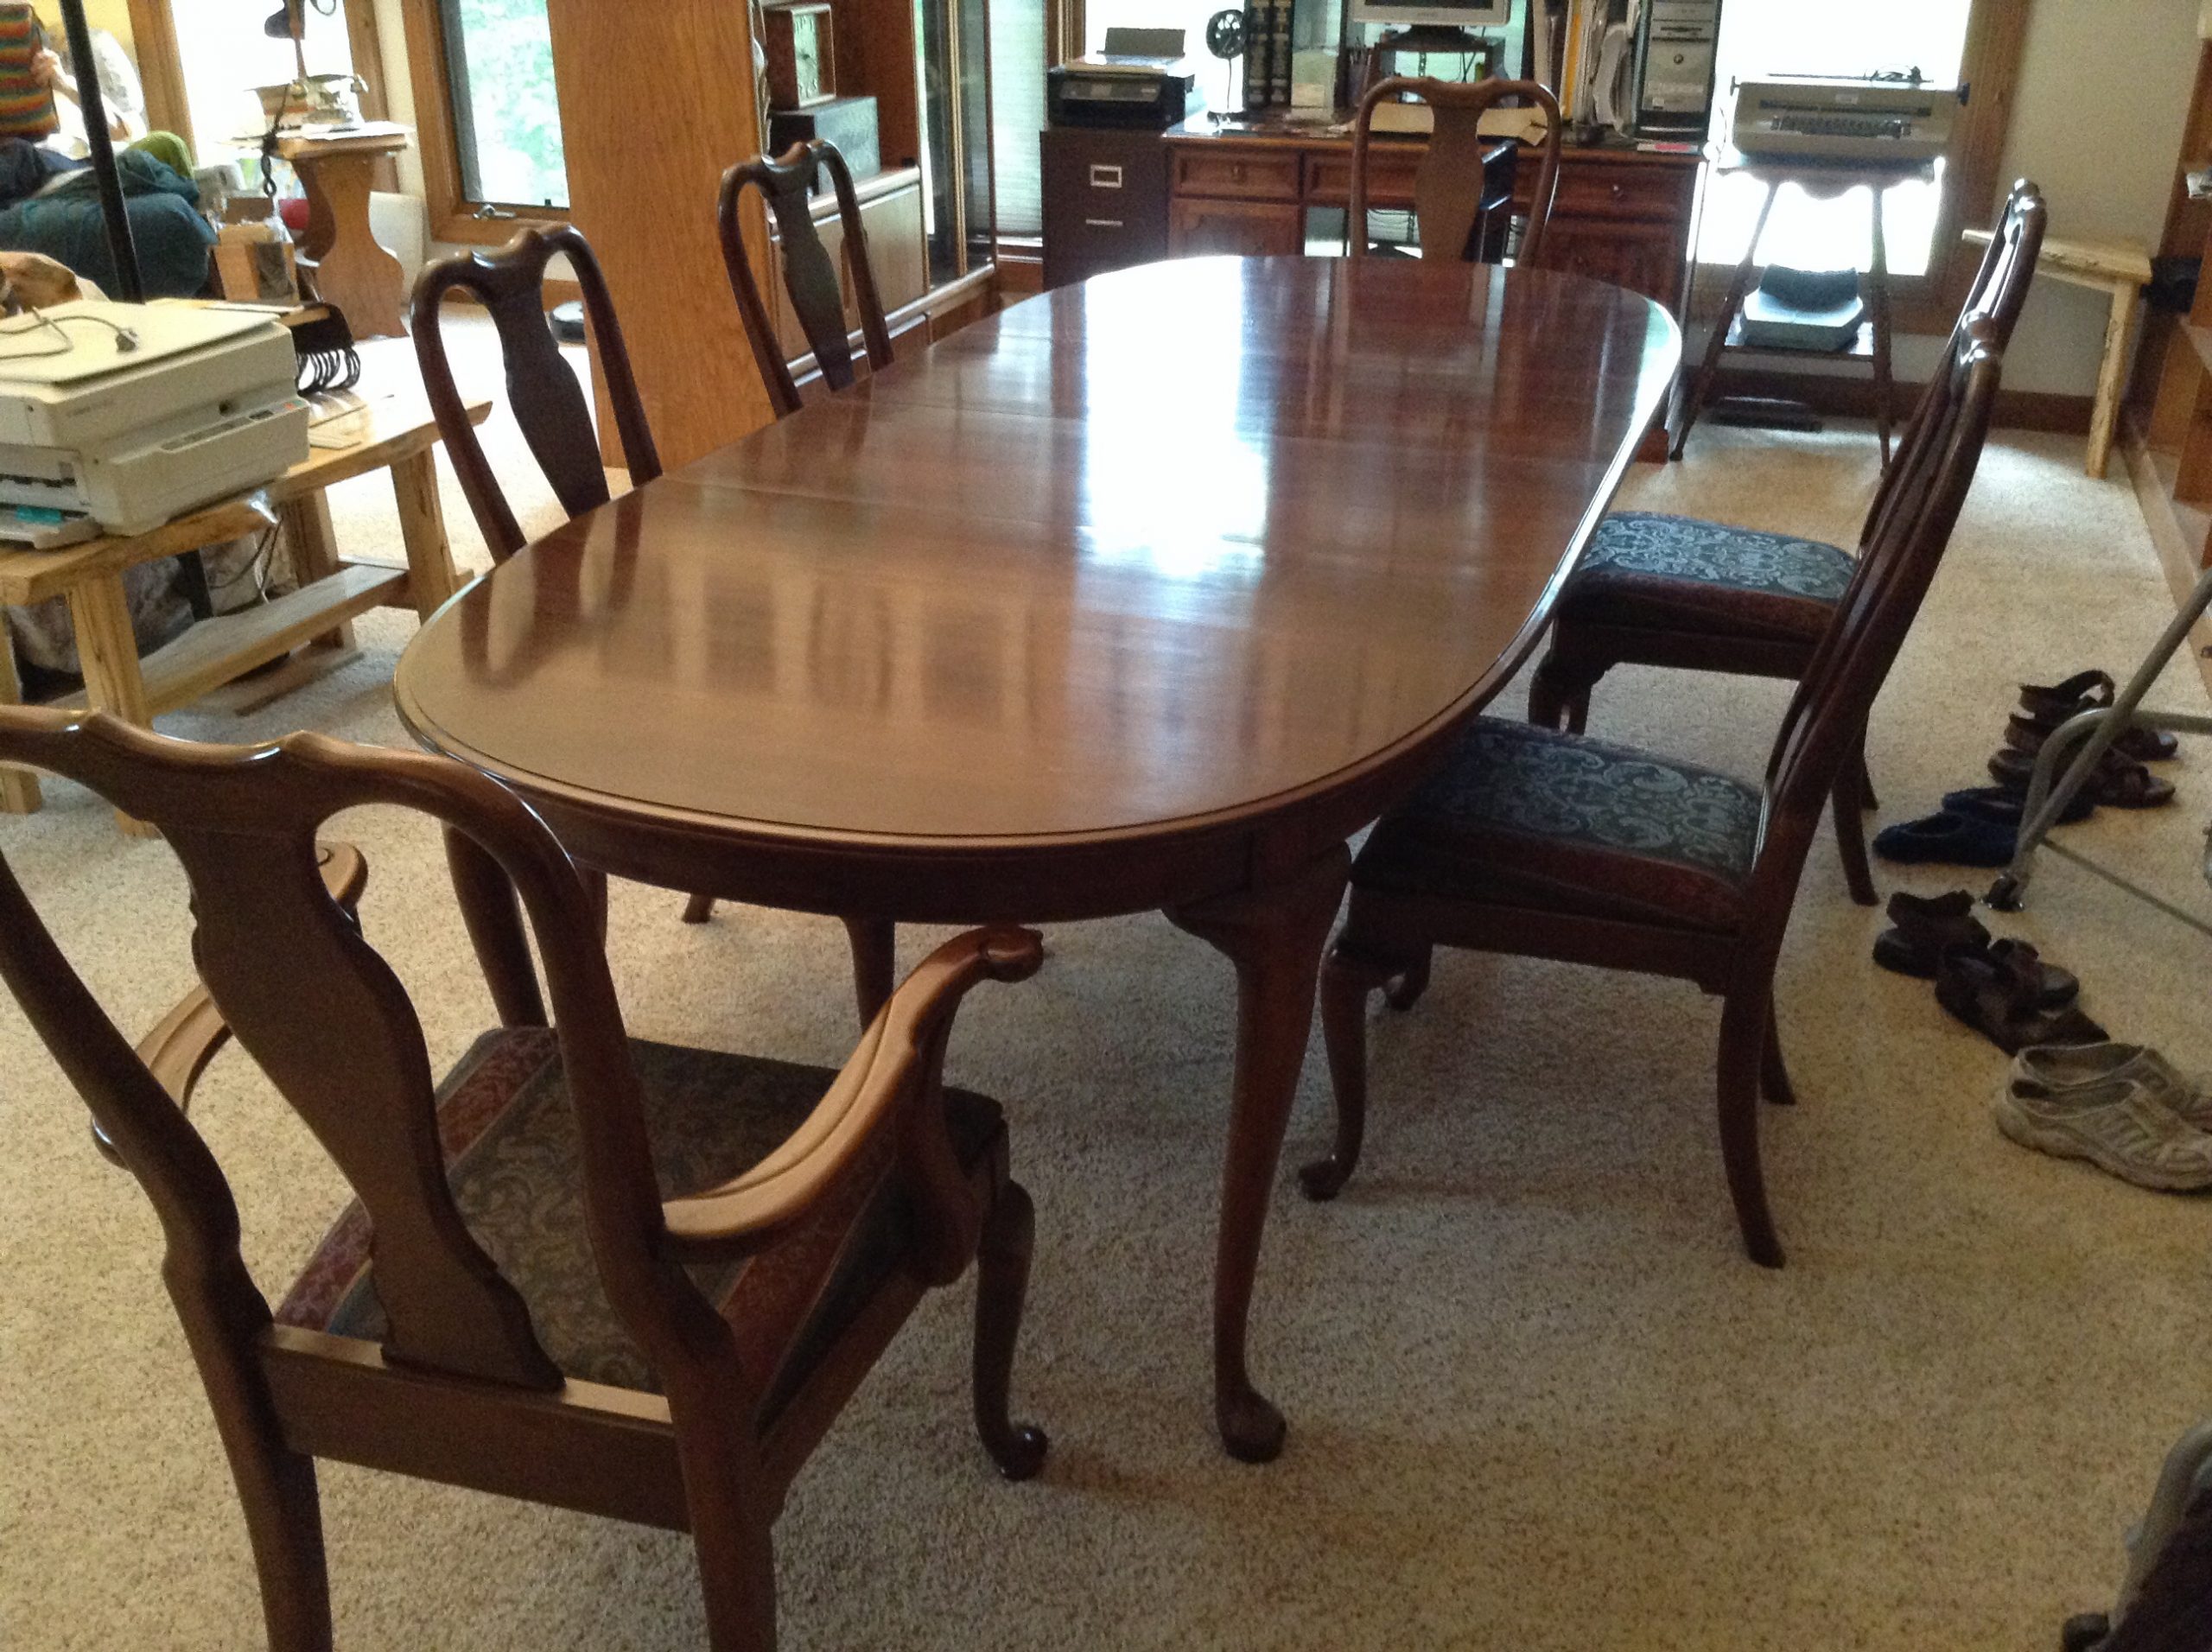 Kling Colonial Dining Room Set W 6 Chairs Antique Appraisal within dimensions 2592 X 1936